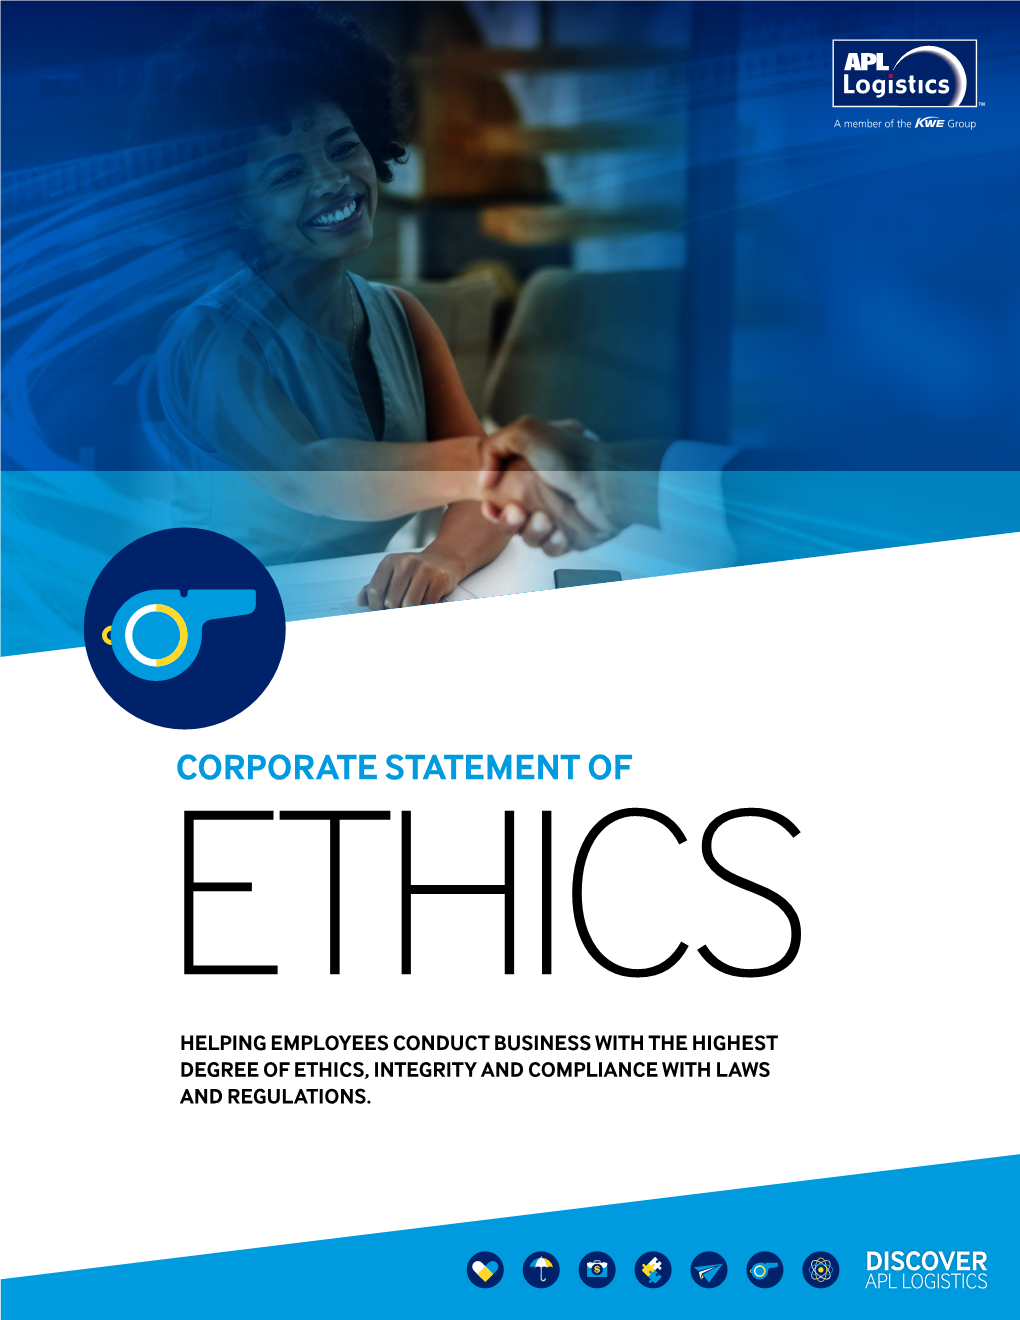 Corporate Statement of Ethics Helping Employees Conduct Business with the Highest Degree of Ethics, Integrity and Compliance with Laws and Regulations